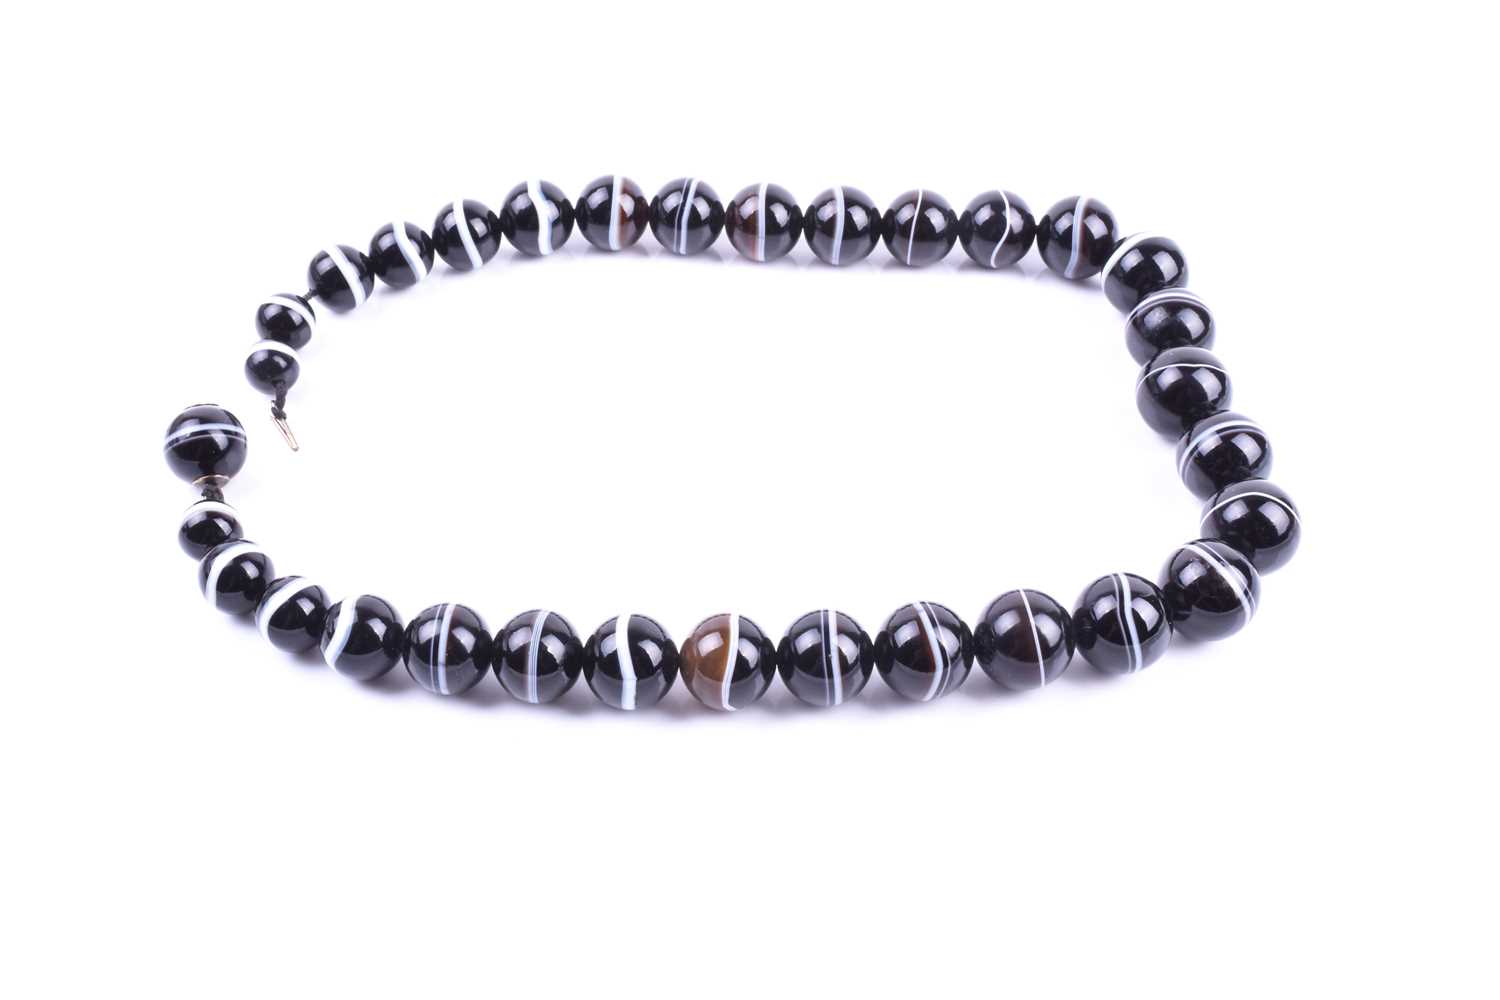 A banded agate necklace, formed of 32 graduated beads, one concealing fitted base metal clasp, the